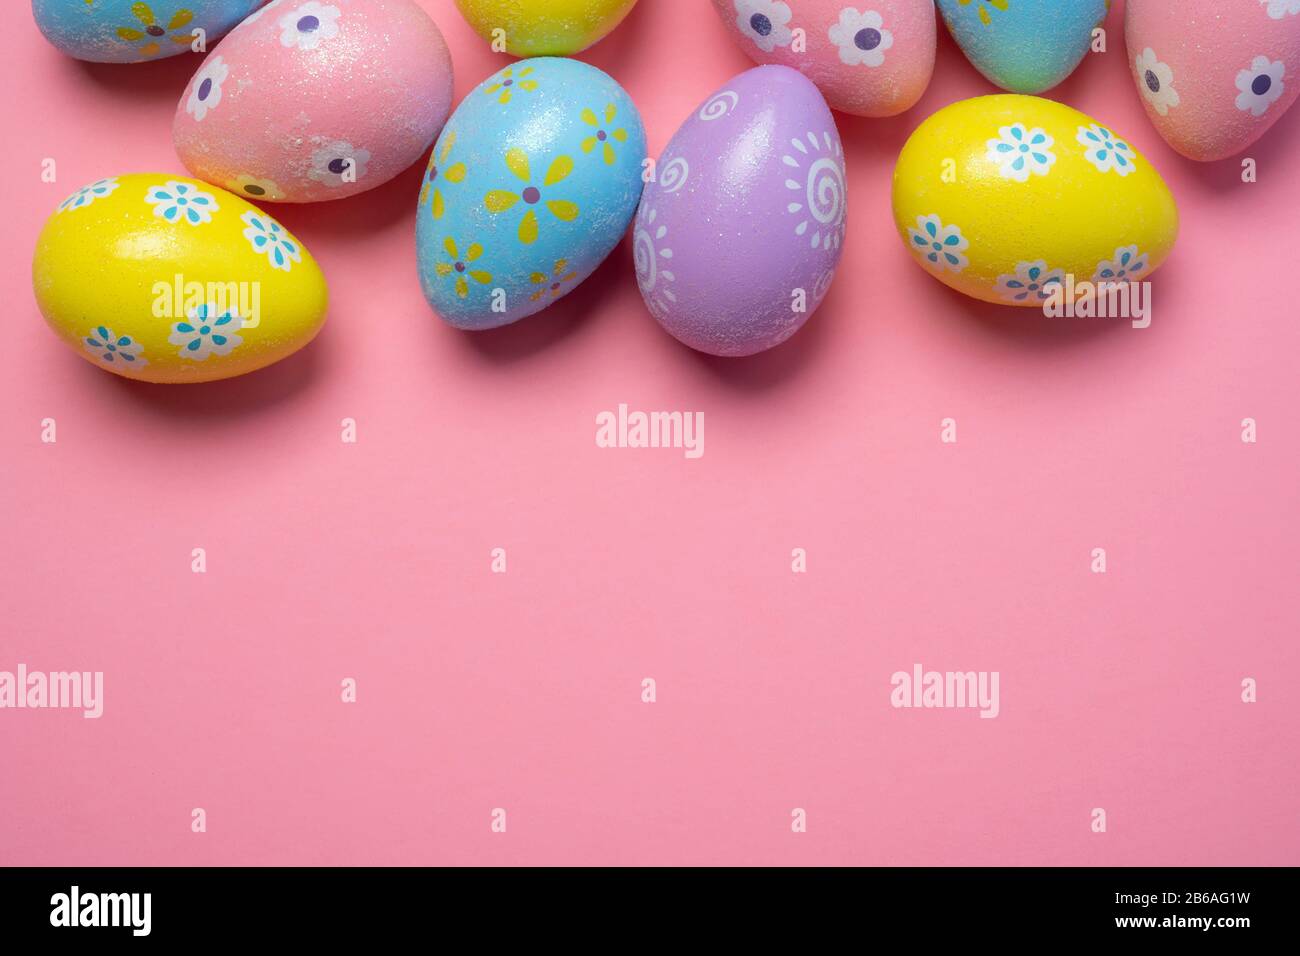 Painted Easter eggs on a colorful background Stock Photo